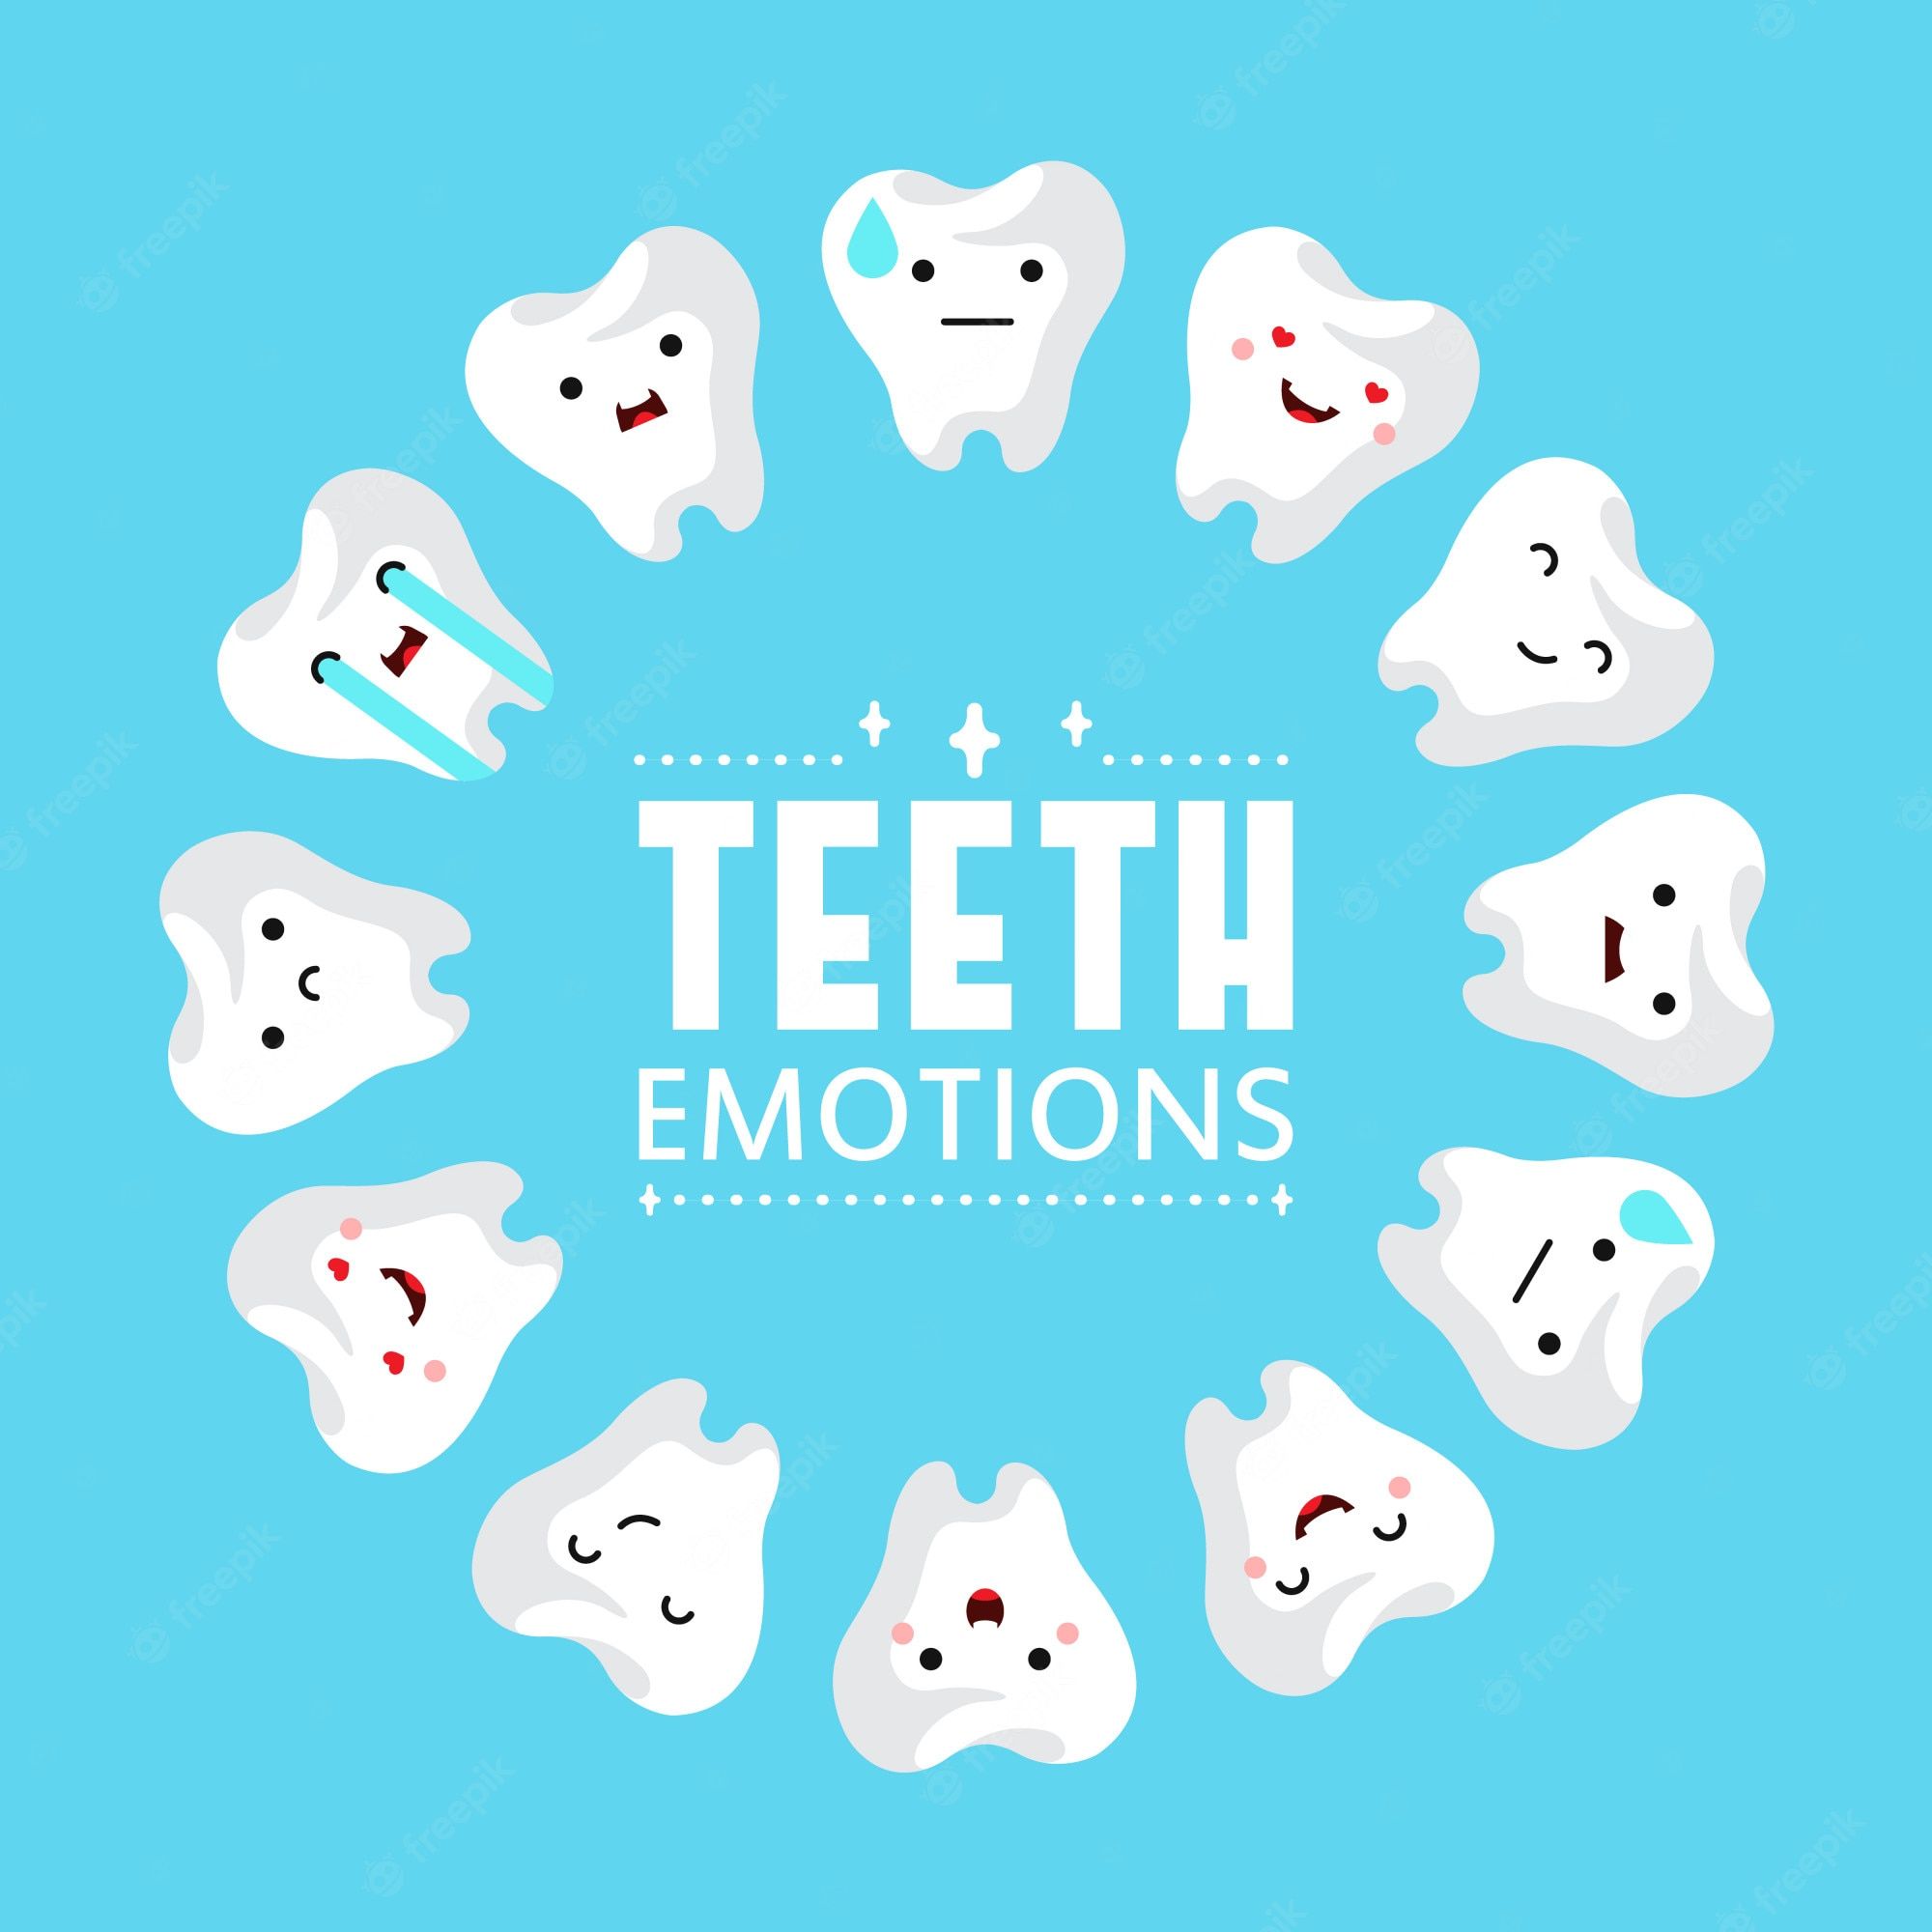 Dental health concept with cute cartoon teeth characters with different emotions on a blue background. Vector illustration. - Dentist